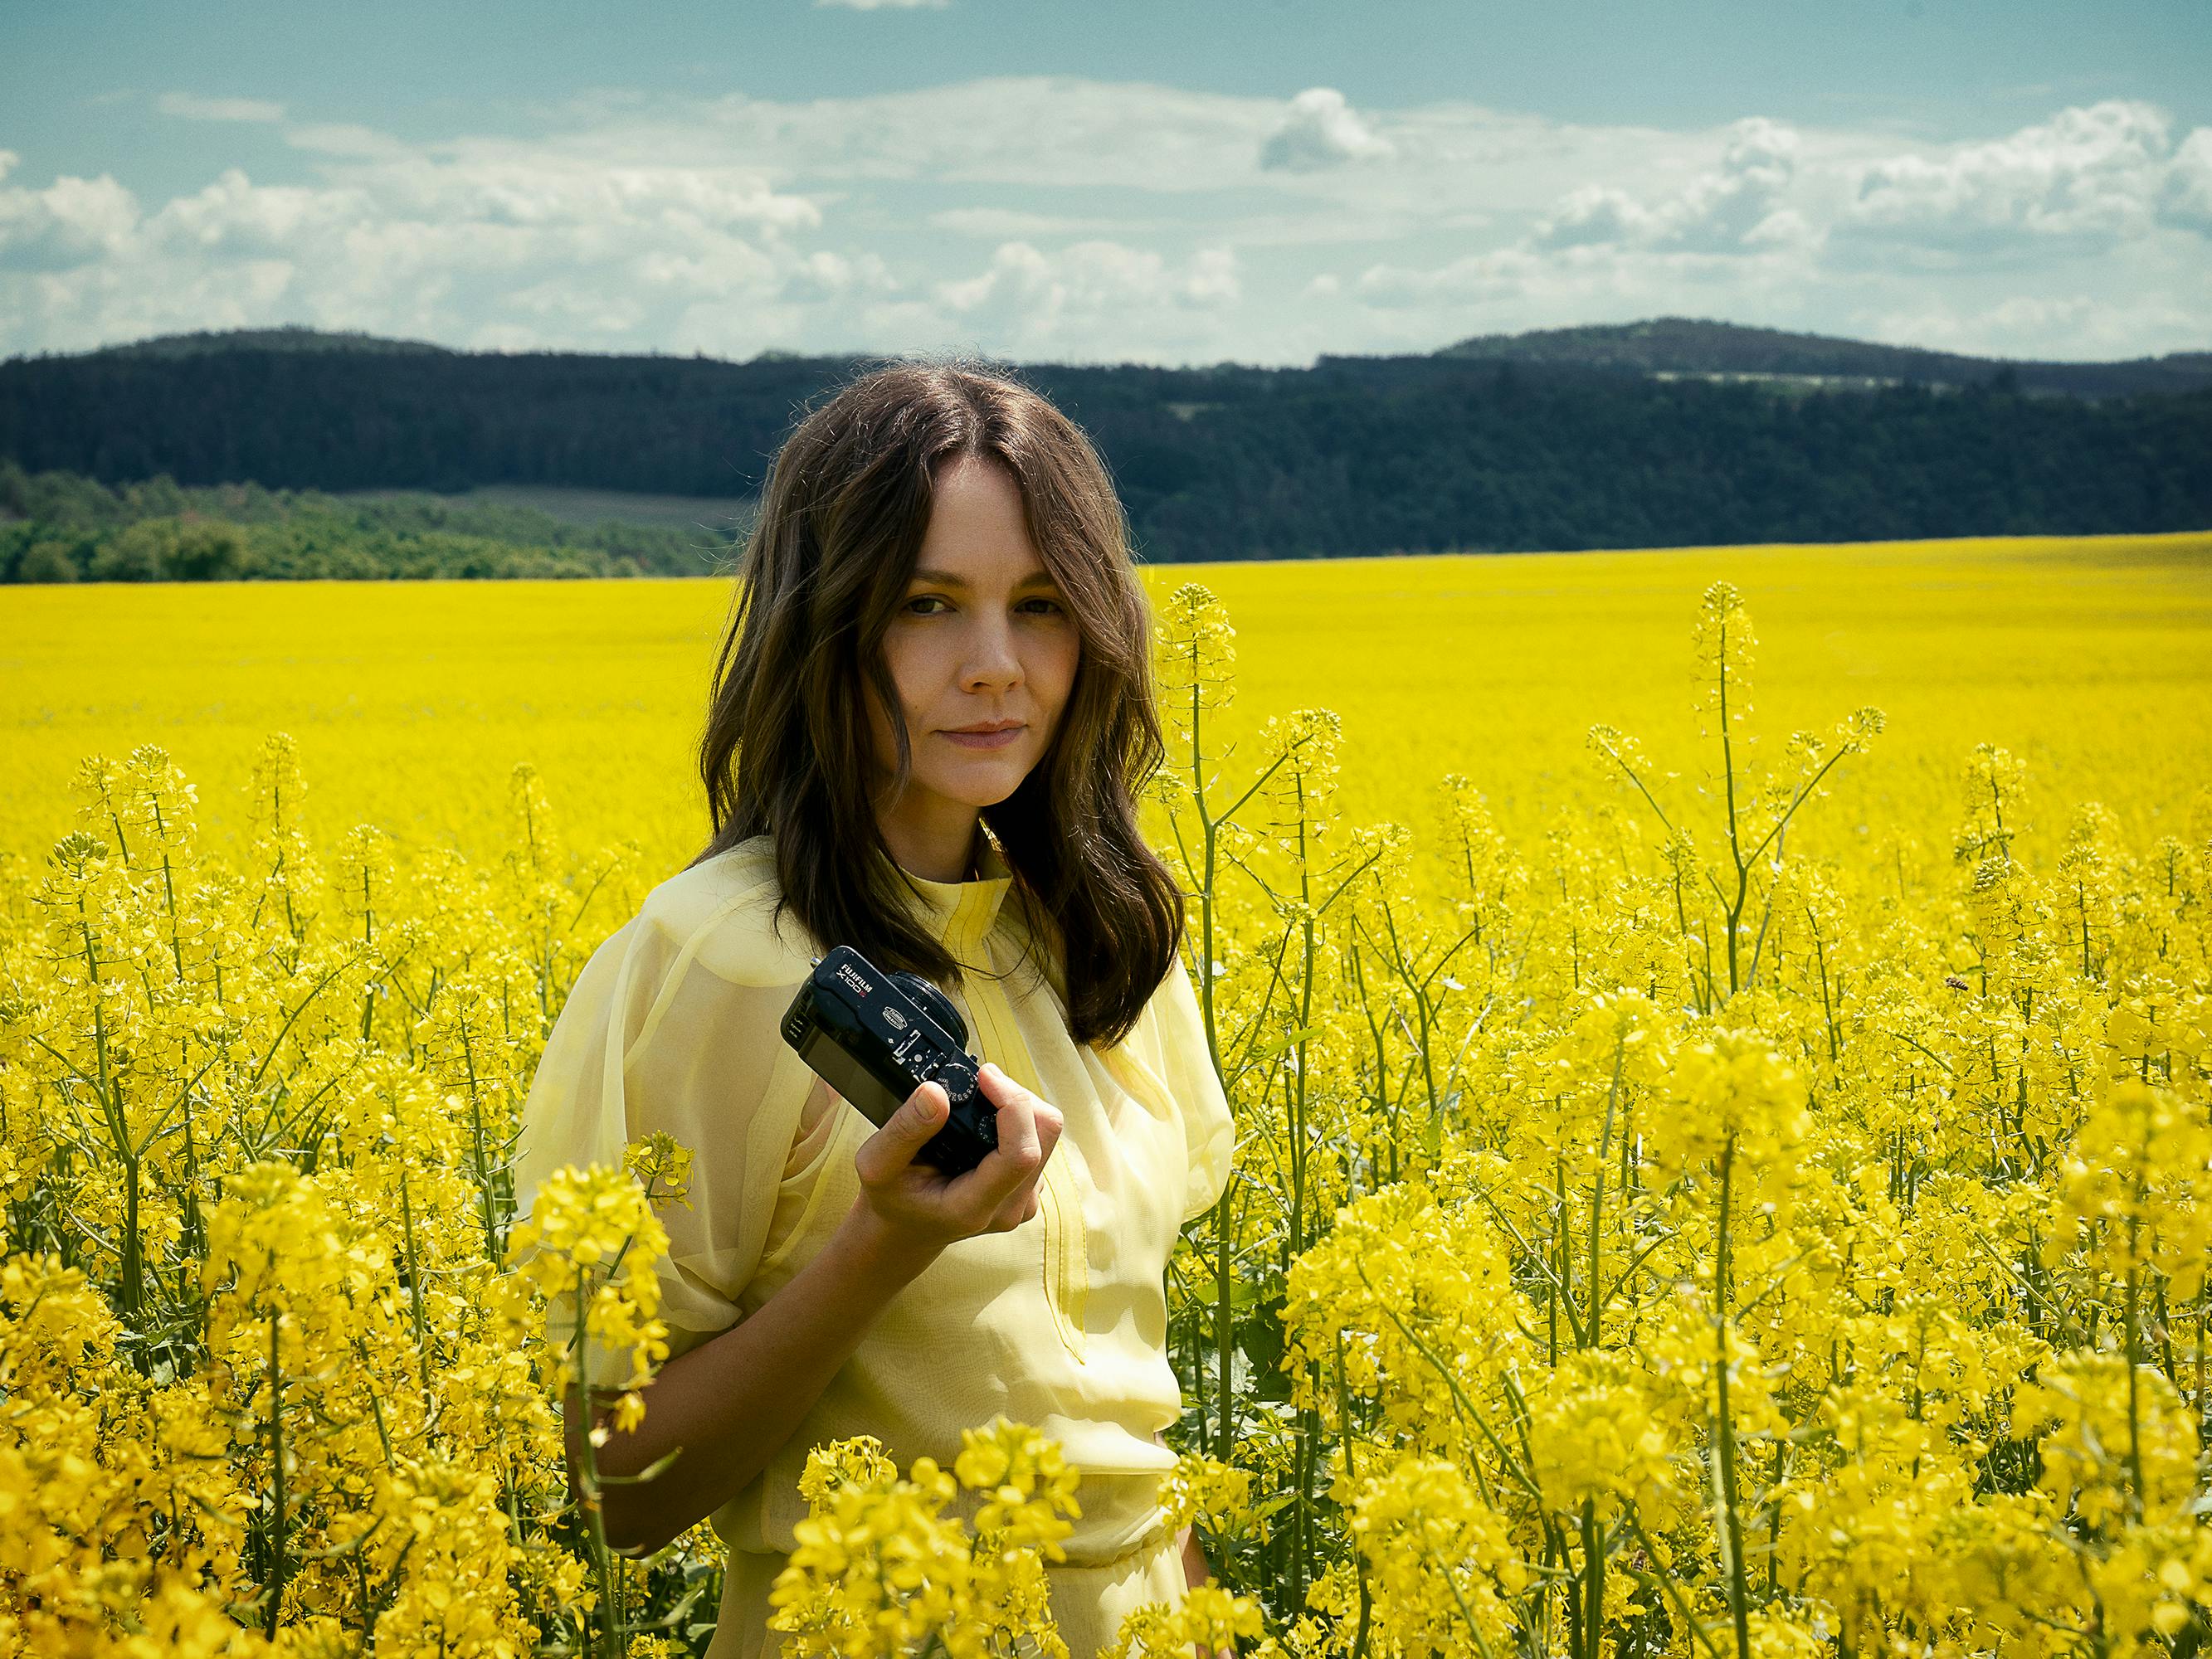 Lenka (Carey Mulligan) wears a yellow top and walks through a field of yellow flowers, holding a camera.